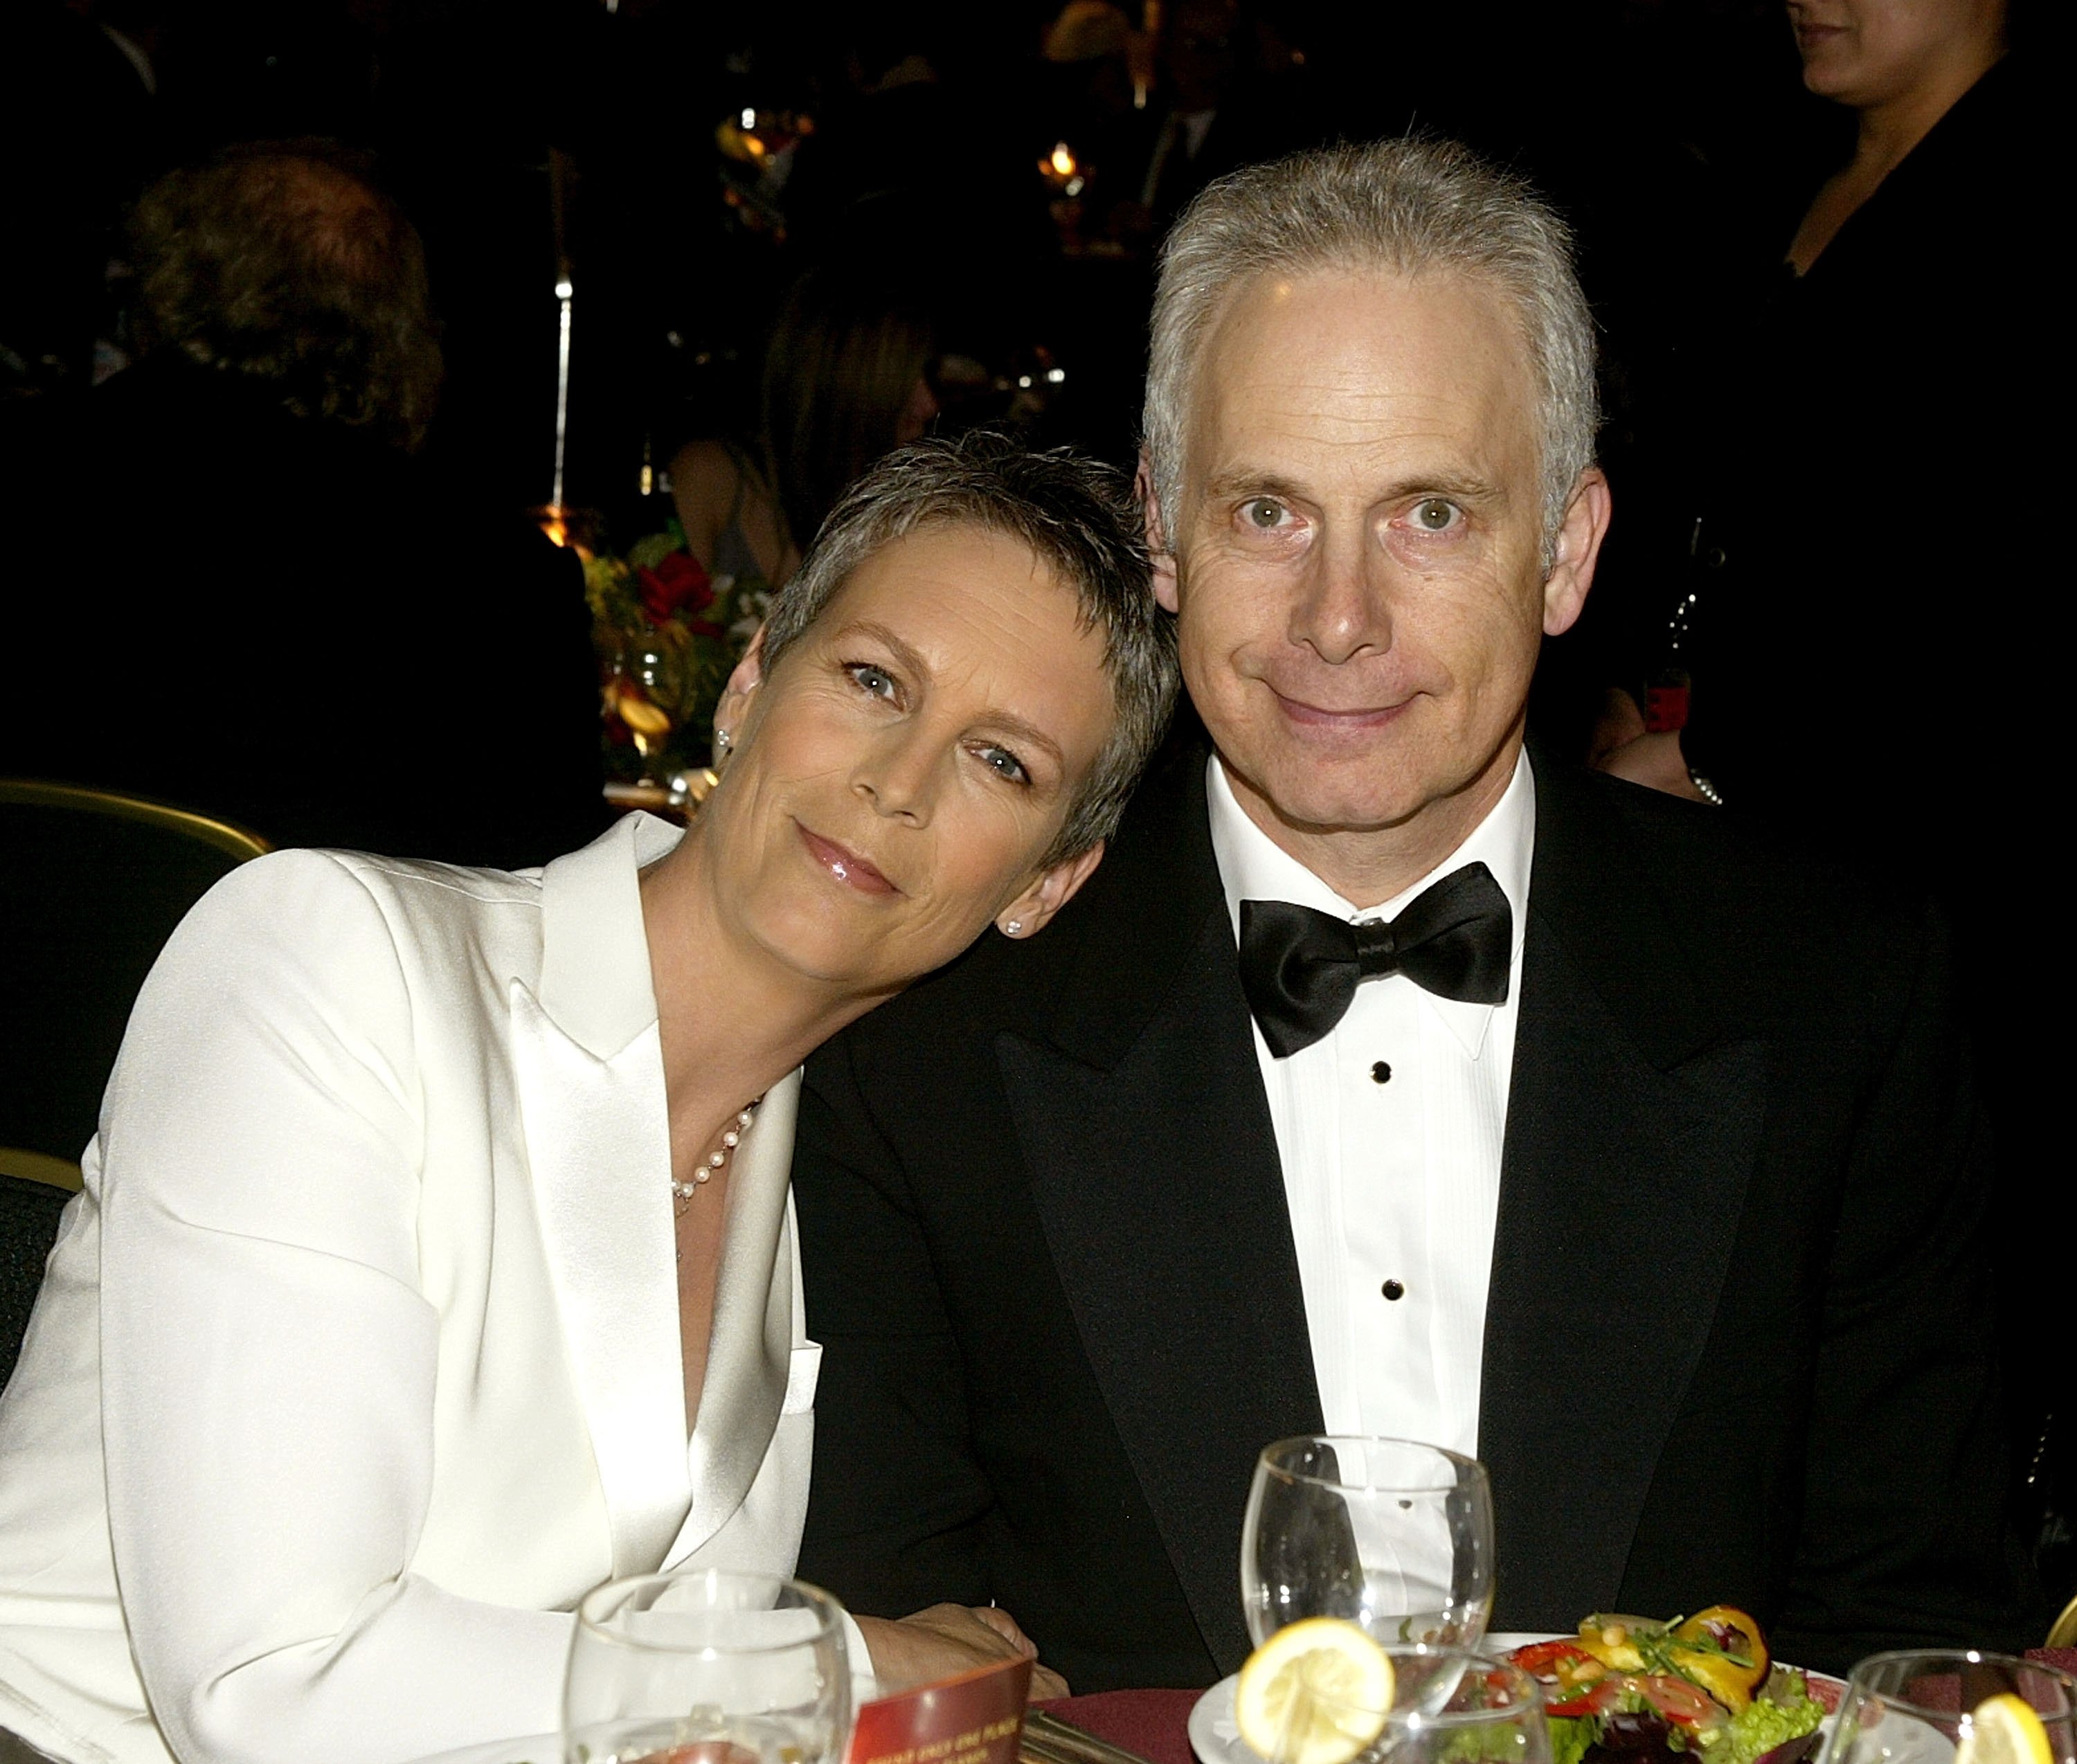  Actress Jamie Lee Curtis (L) and her husband Christopher Guest attend the 6th Annual Costume Guild Awards reception at the Beverly Hilton Hotel February 21, 2004 | Source: Getty Images